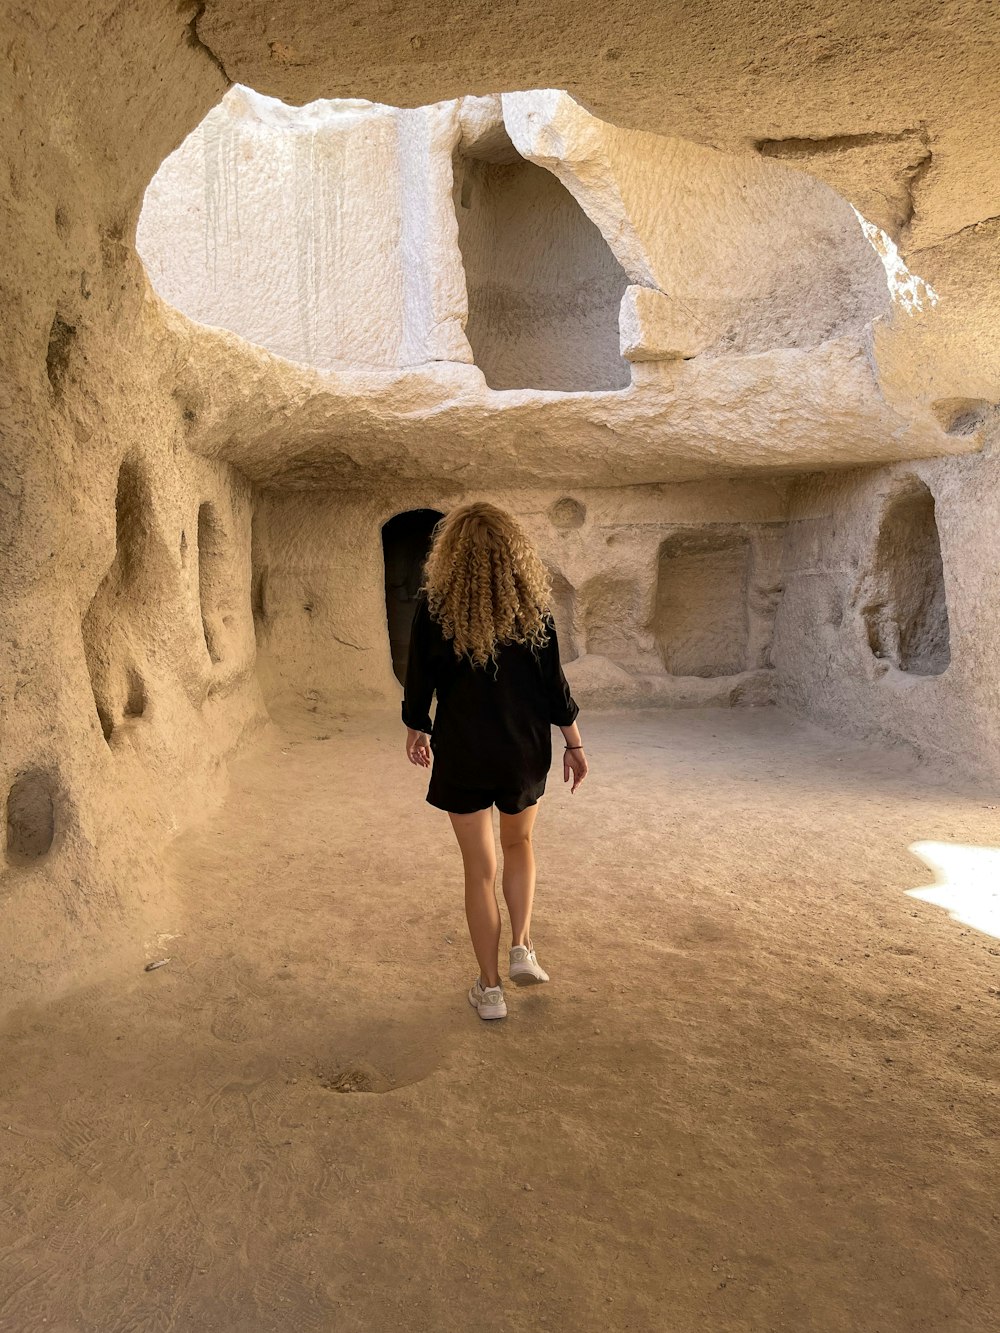 a woman is walking through a cave like area